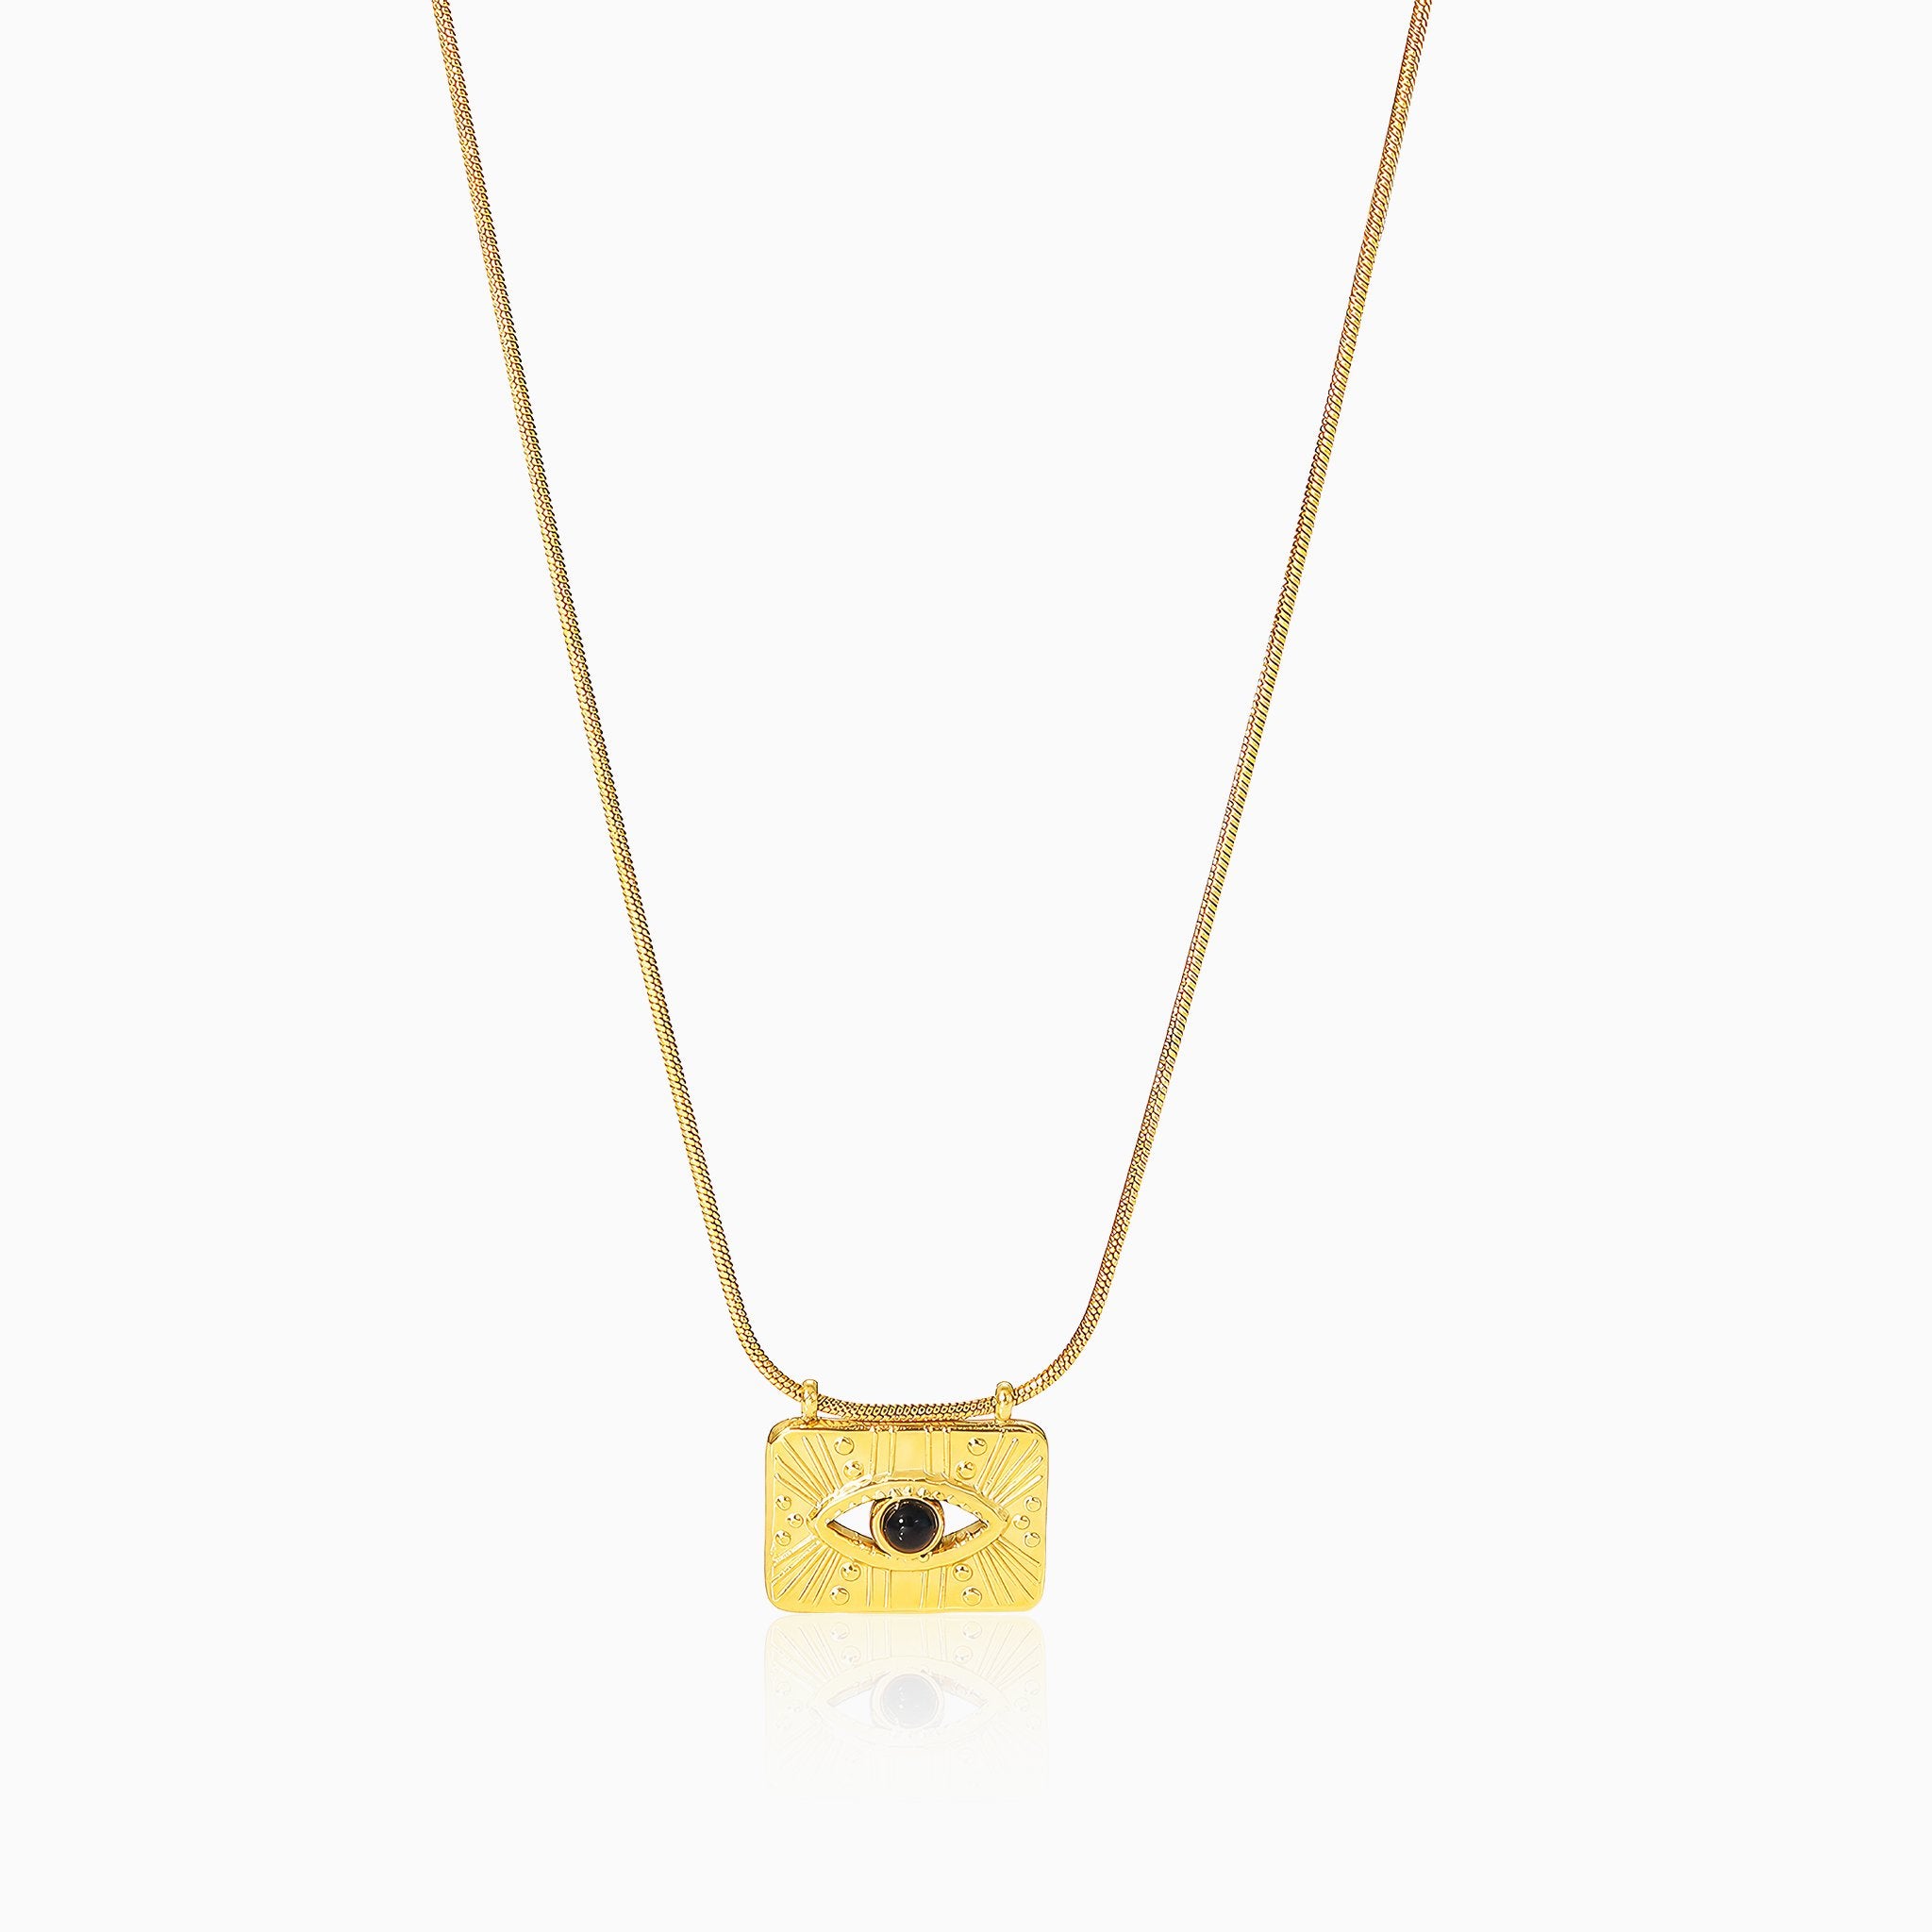 Square Eye Pendant Necklace - Nobbier - Necklace - 18K Gold And Titanium PVD Coated Jewelry